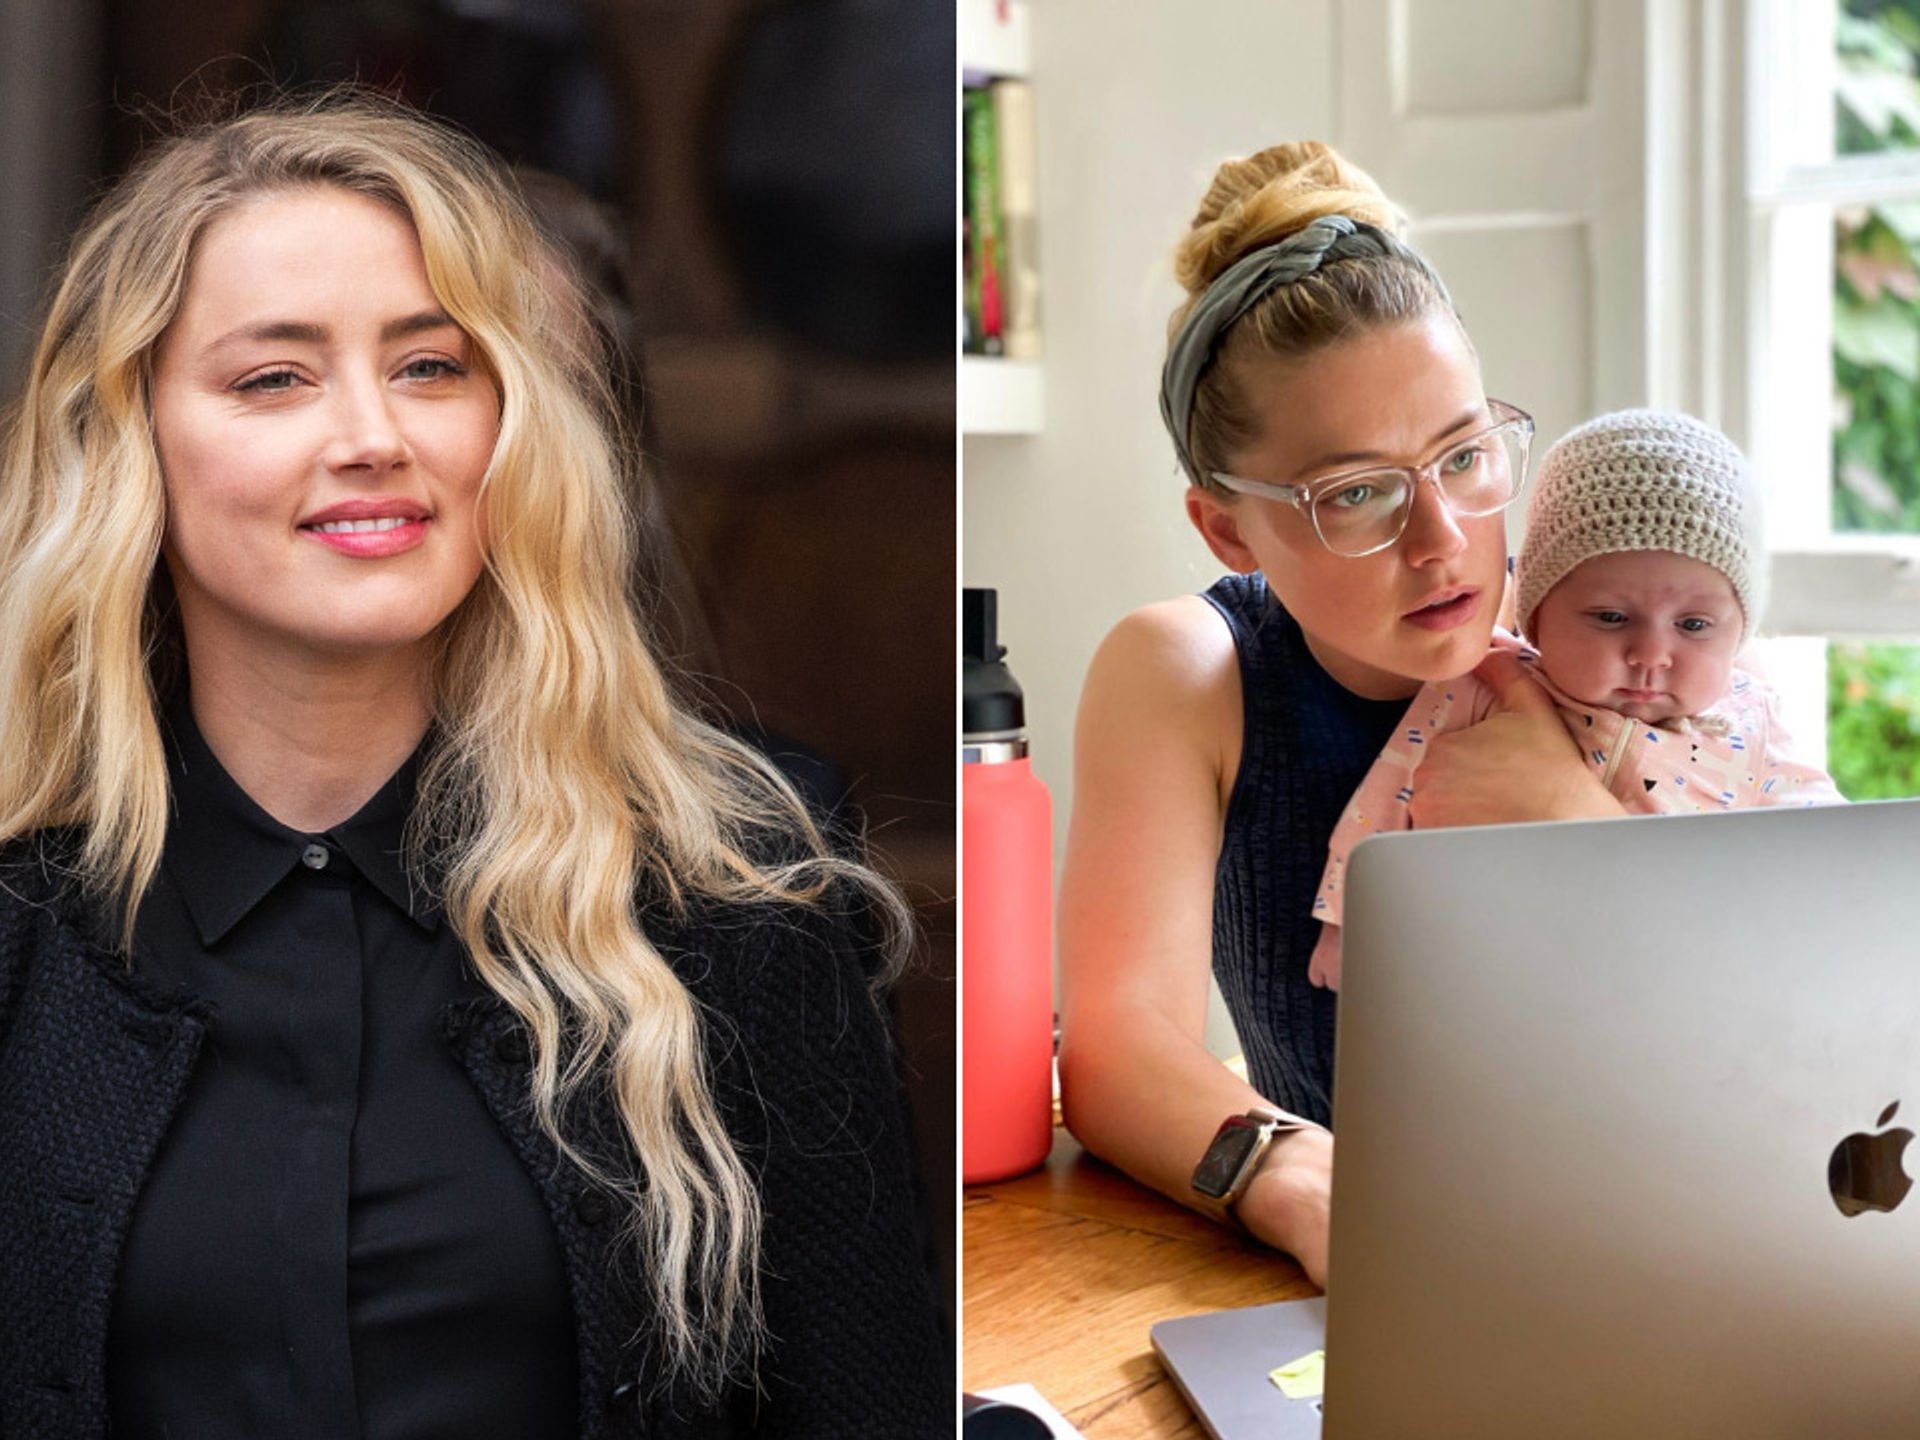 Amber Heard's baby daughter Oonagh – who's the father of Johnny